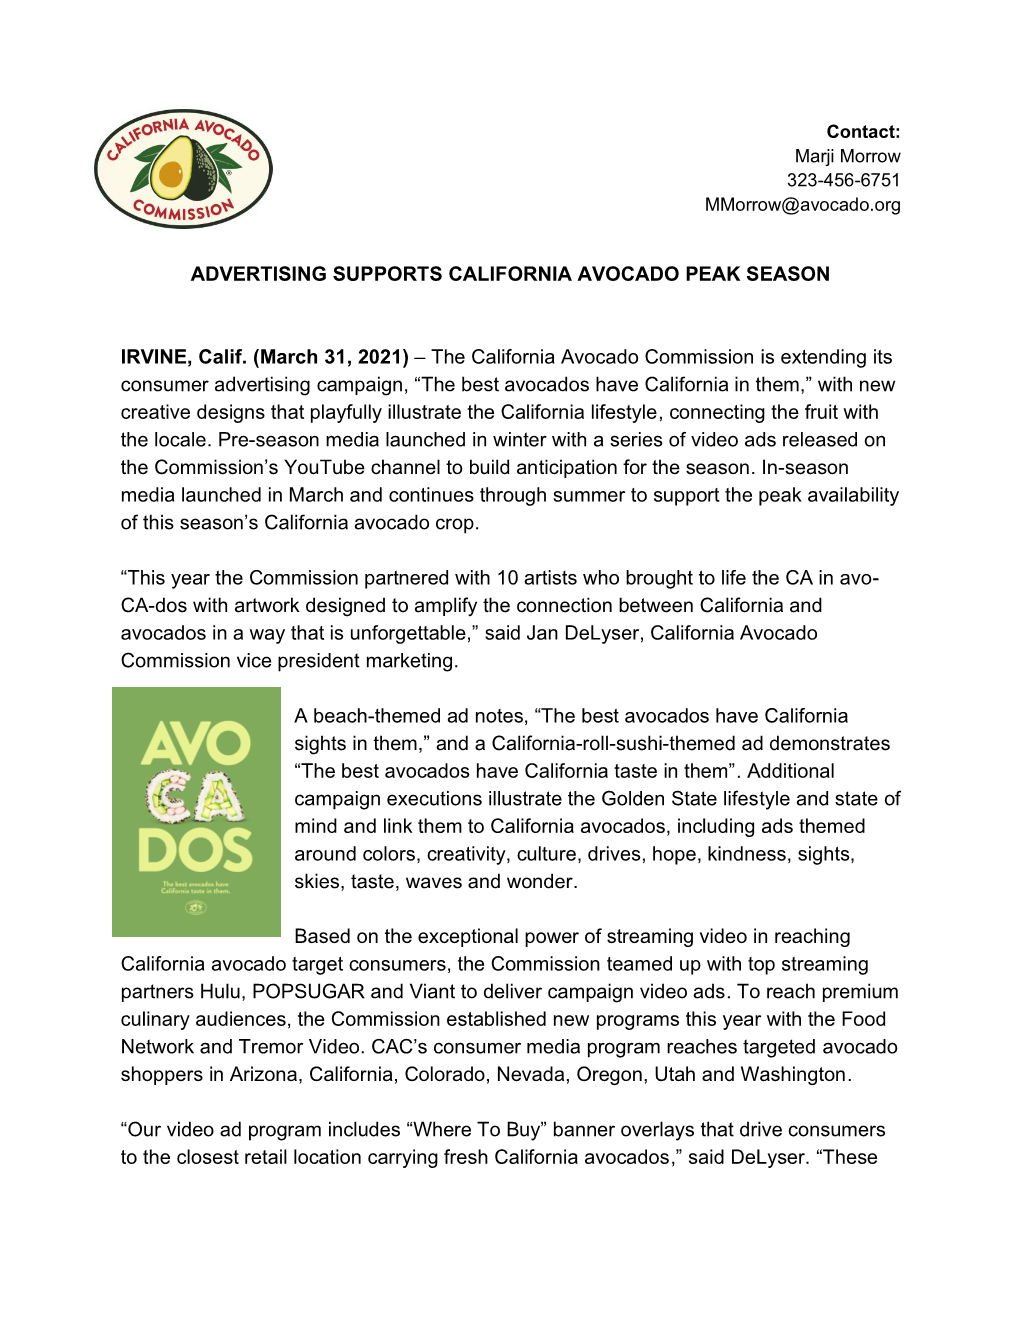 The California Avocado Commission Is